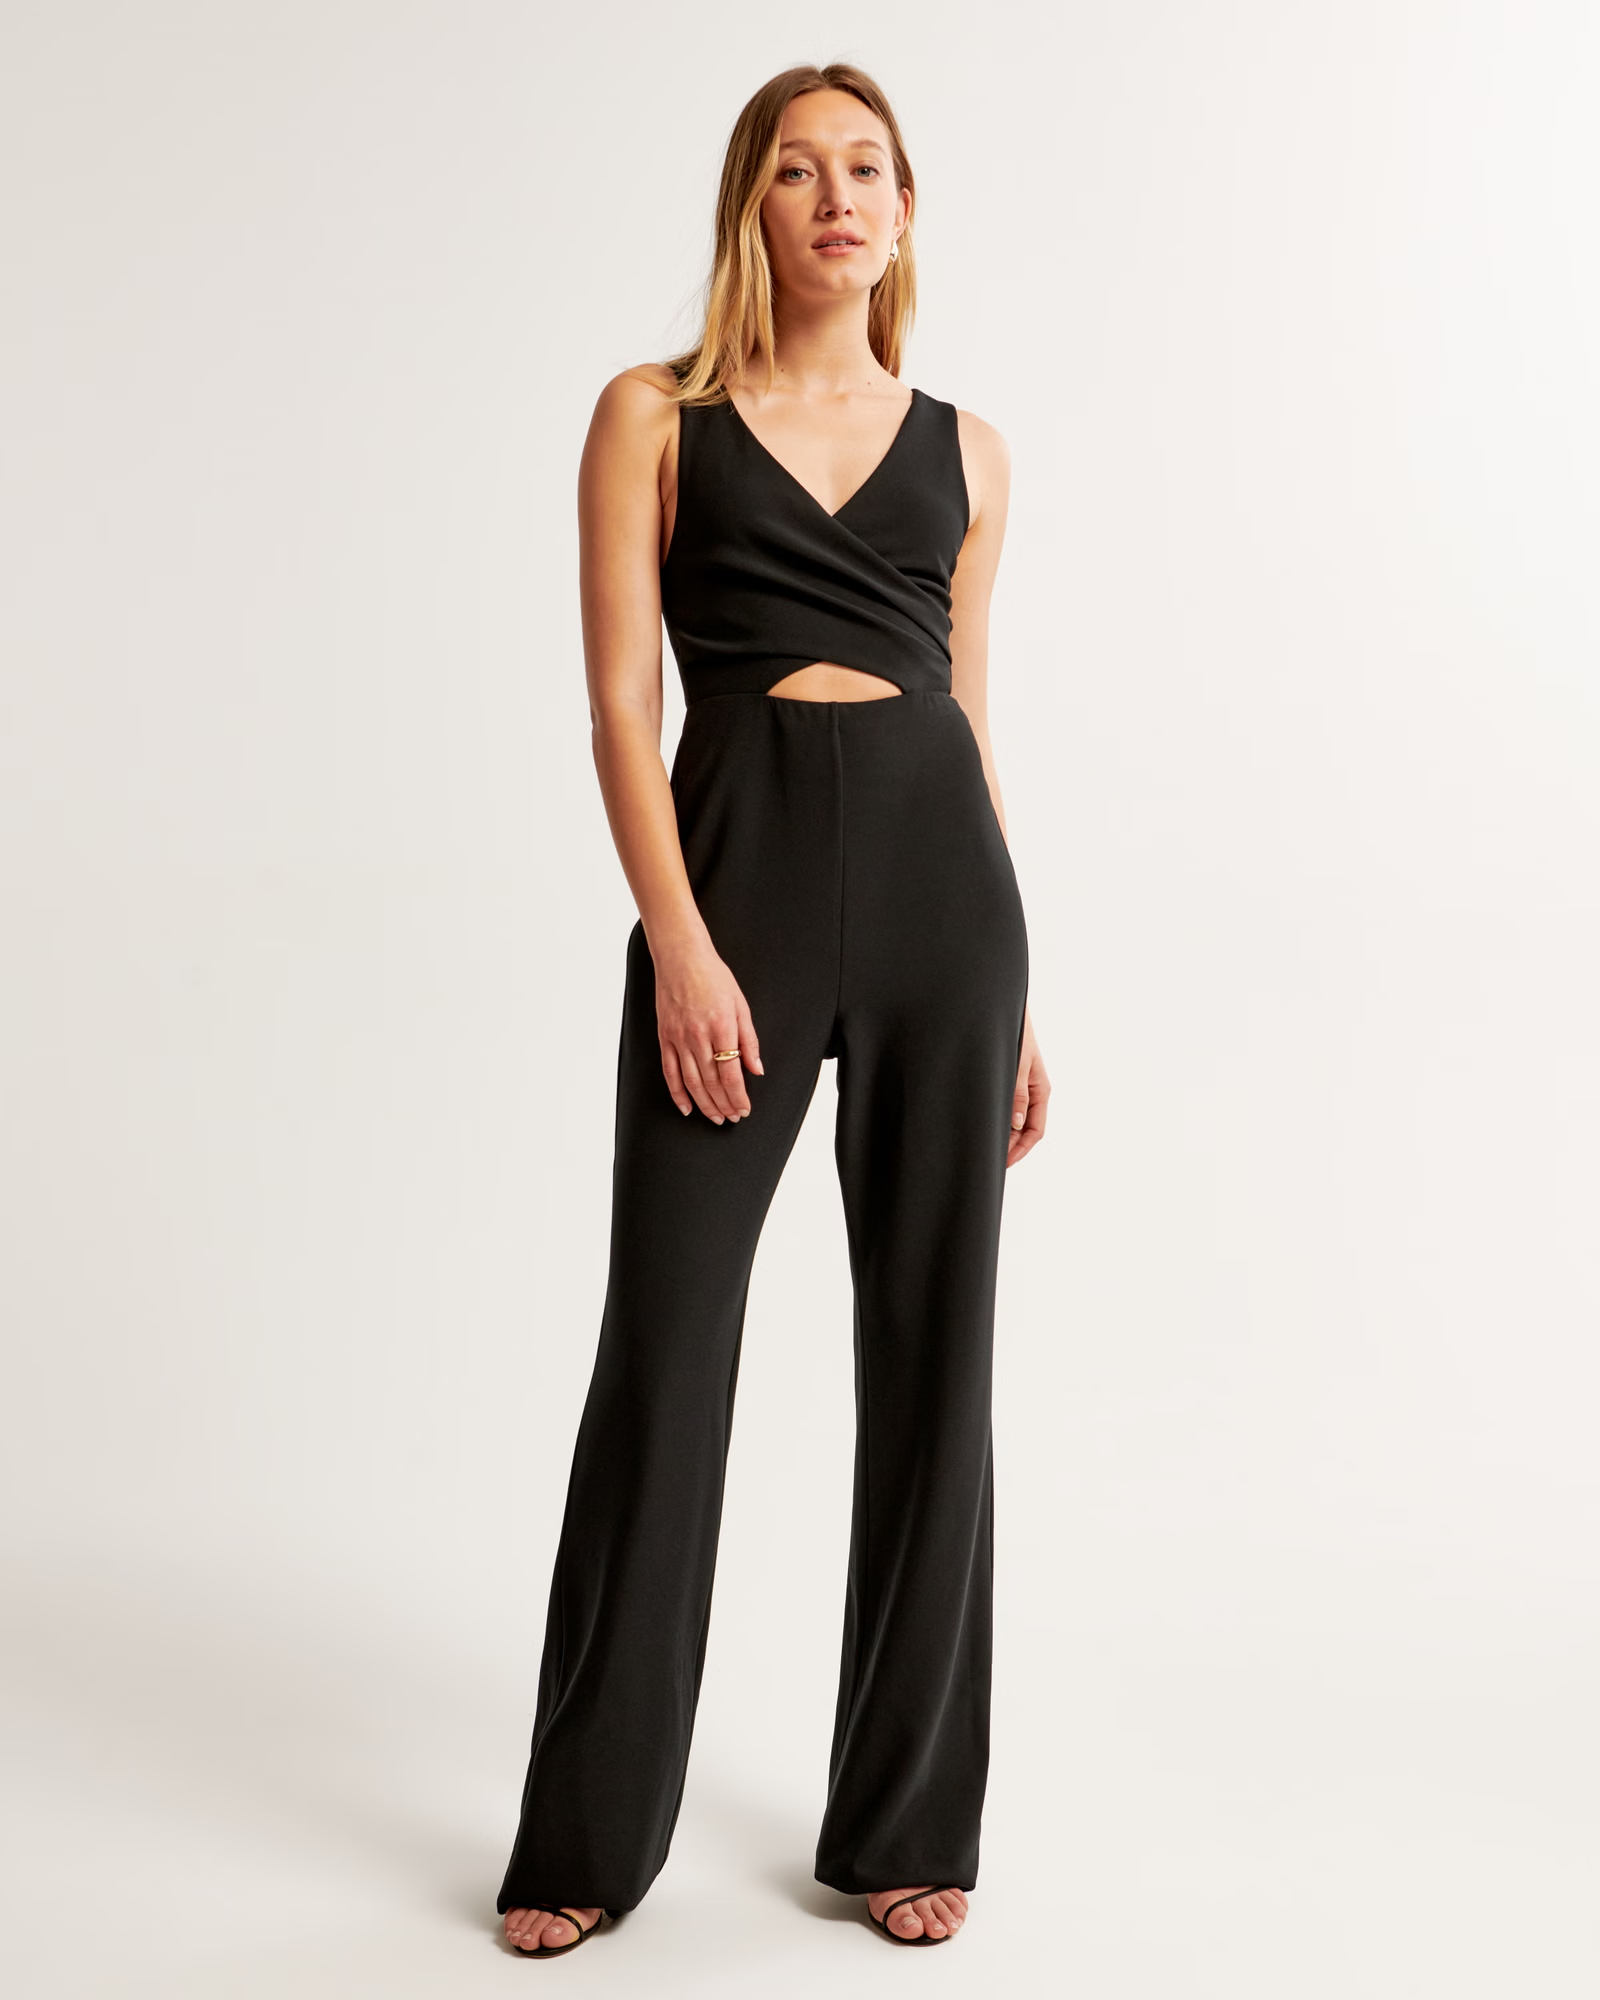 Nike Yoga luxe layered 7/8 jumpsuit in black